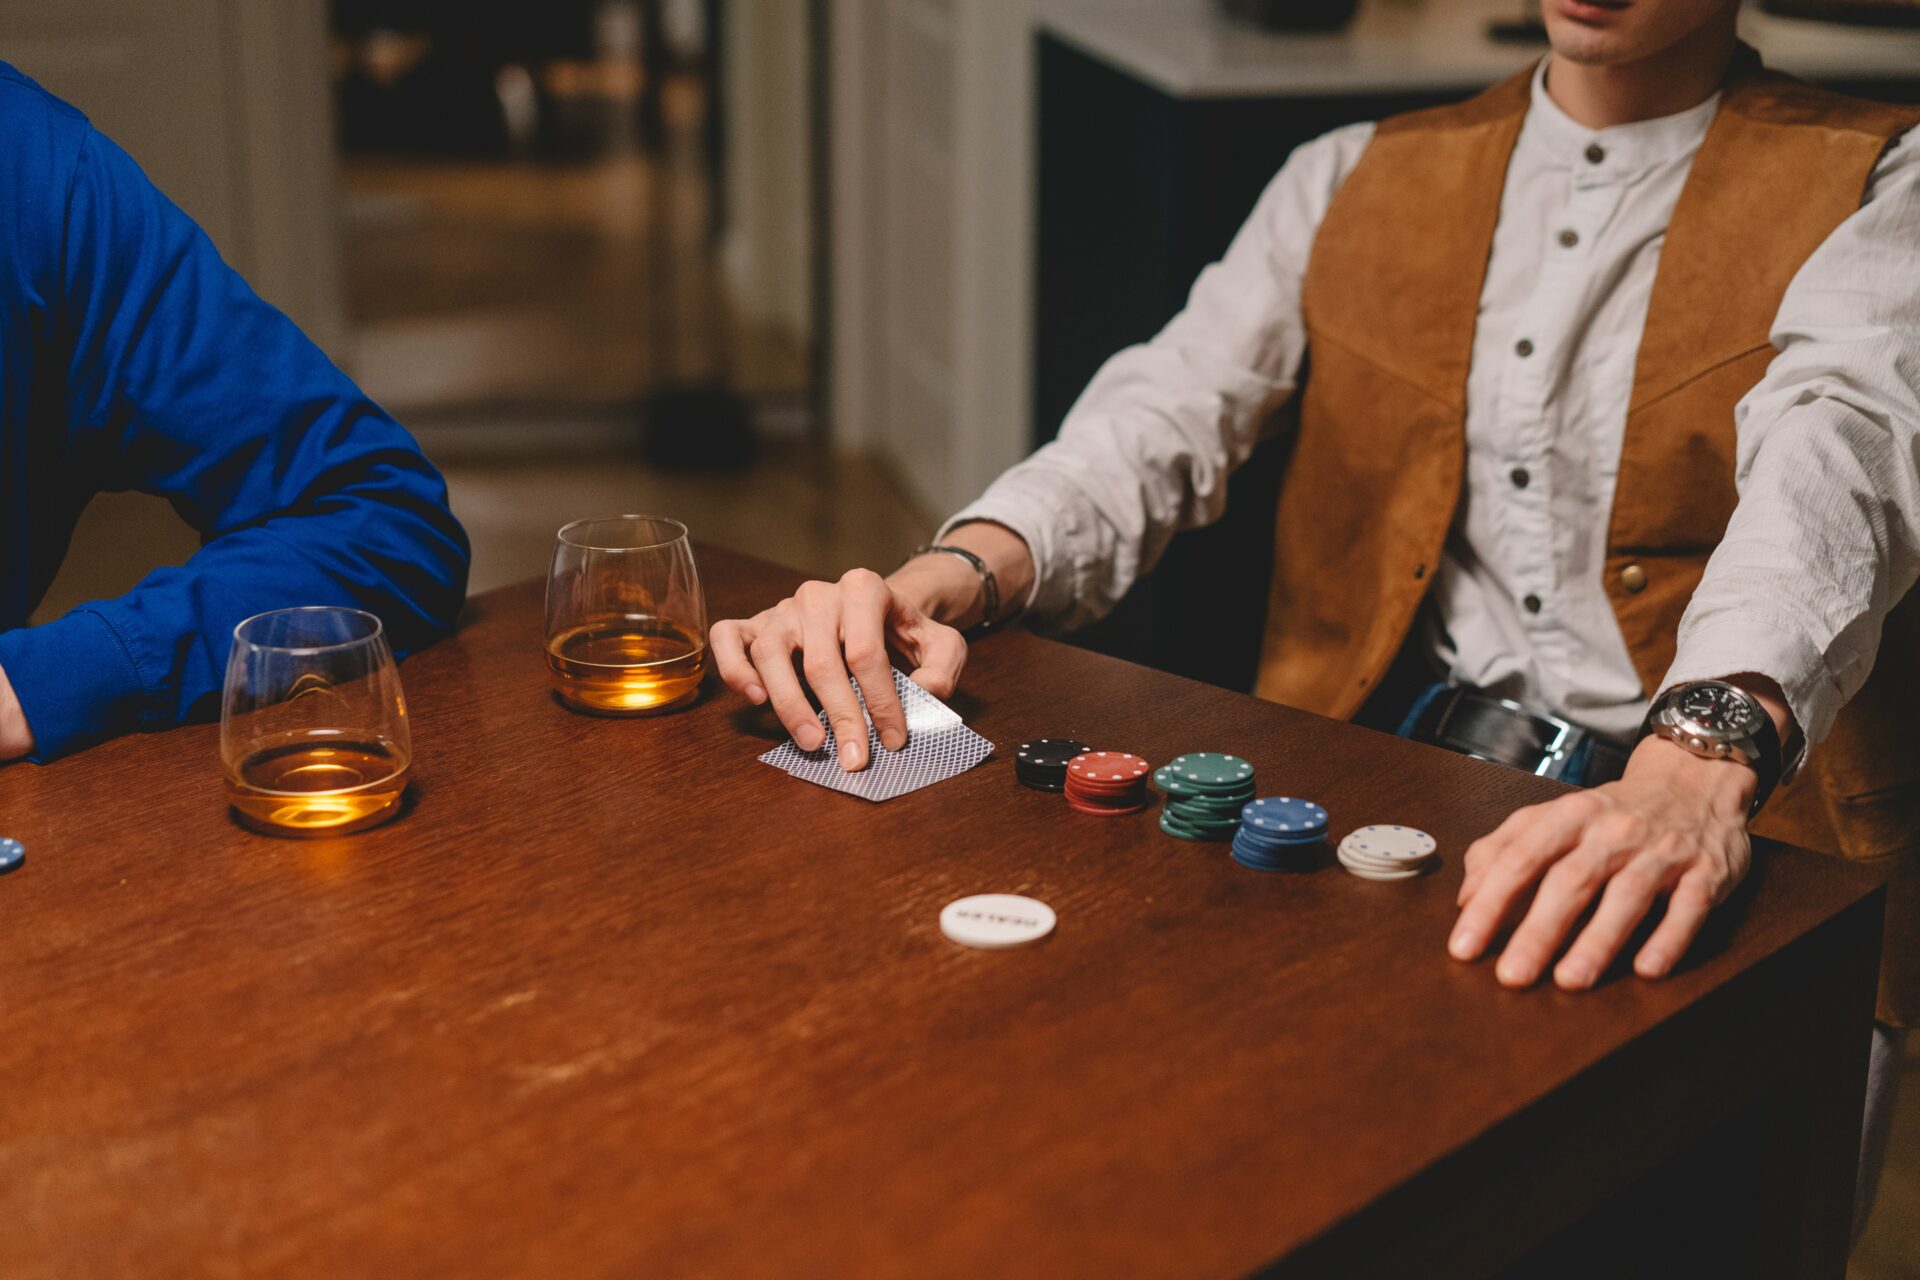 5 Tips for Hosting the Ultimate Poker Night at Your Home